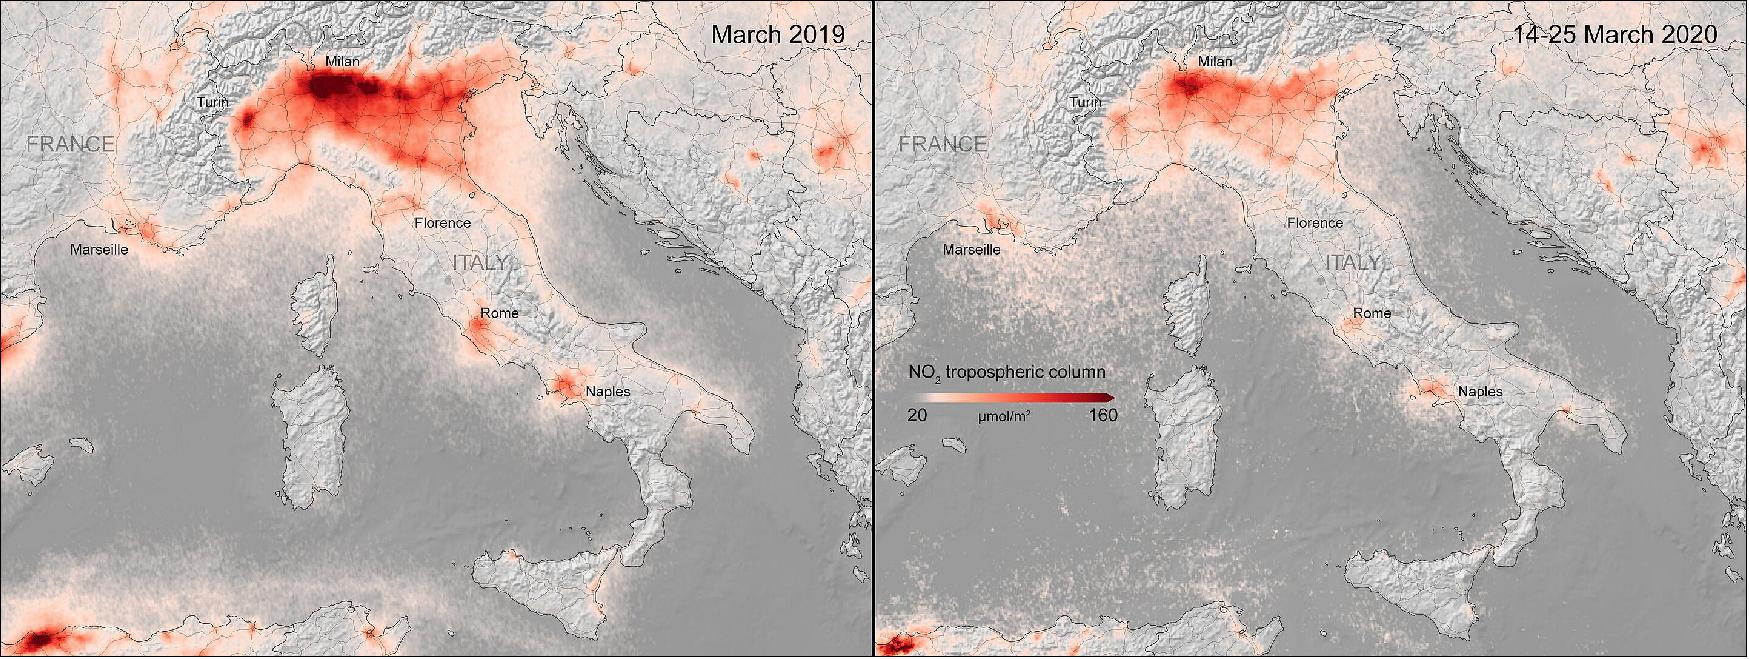 Figure 80: Nitrogen dioxide concentrations over Italy. These images, using data from the Copernicus Sentinel-5P satellite, show the average nitrogen dioxide concentrations from 14 to 25 March 2020, compared to the monthly average concentrations from 2019 (image credit: ESA, the images contain modified Copernicus Sentinel data (2019-20), processed by KNMI/ESA, CC BY-SA 3.0 IGO)